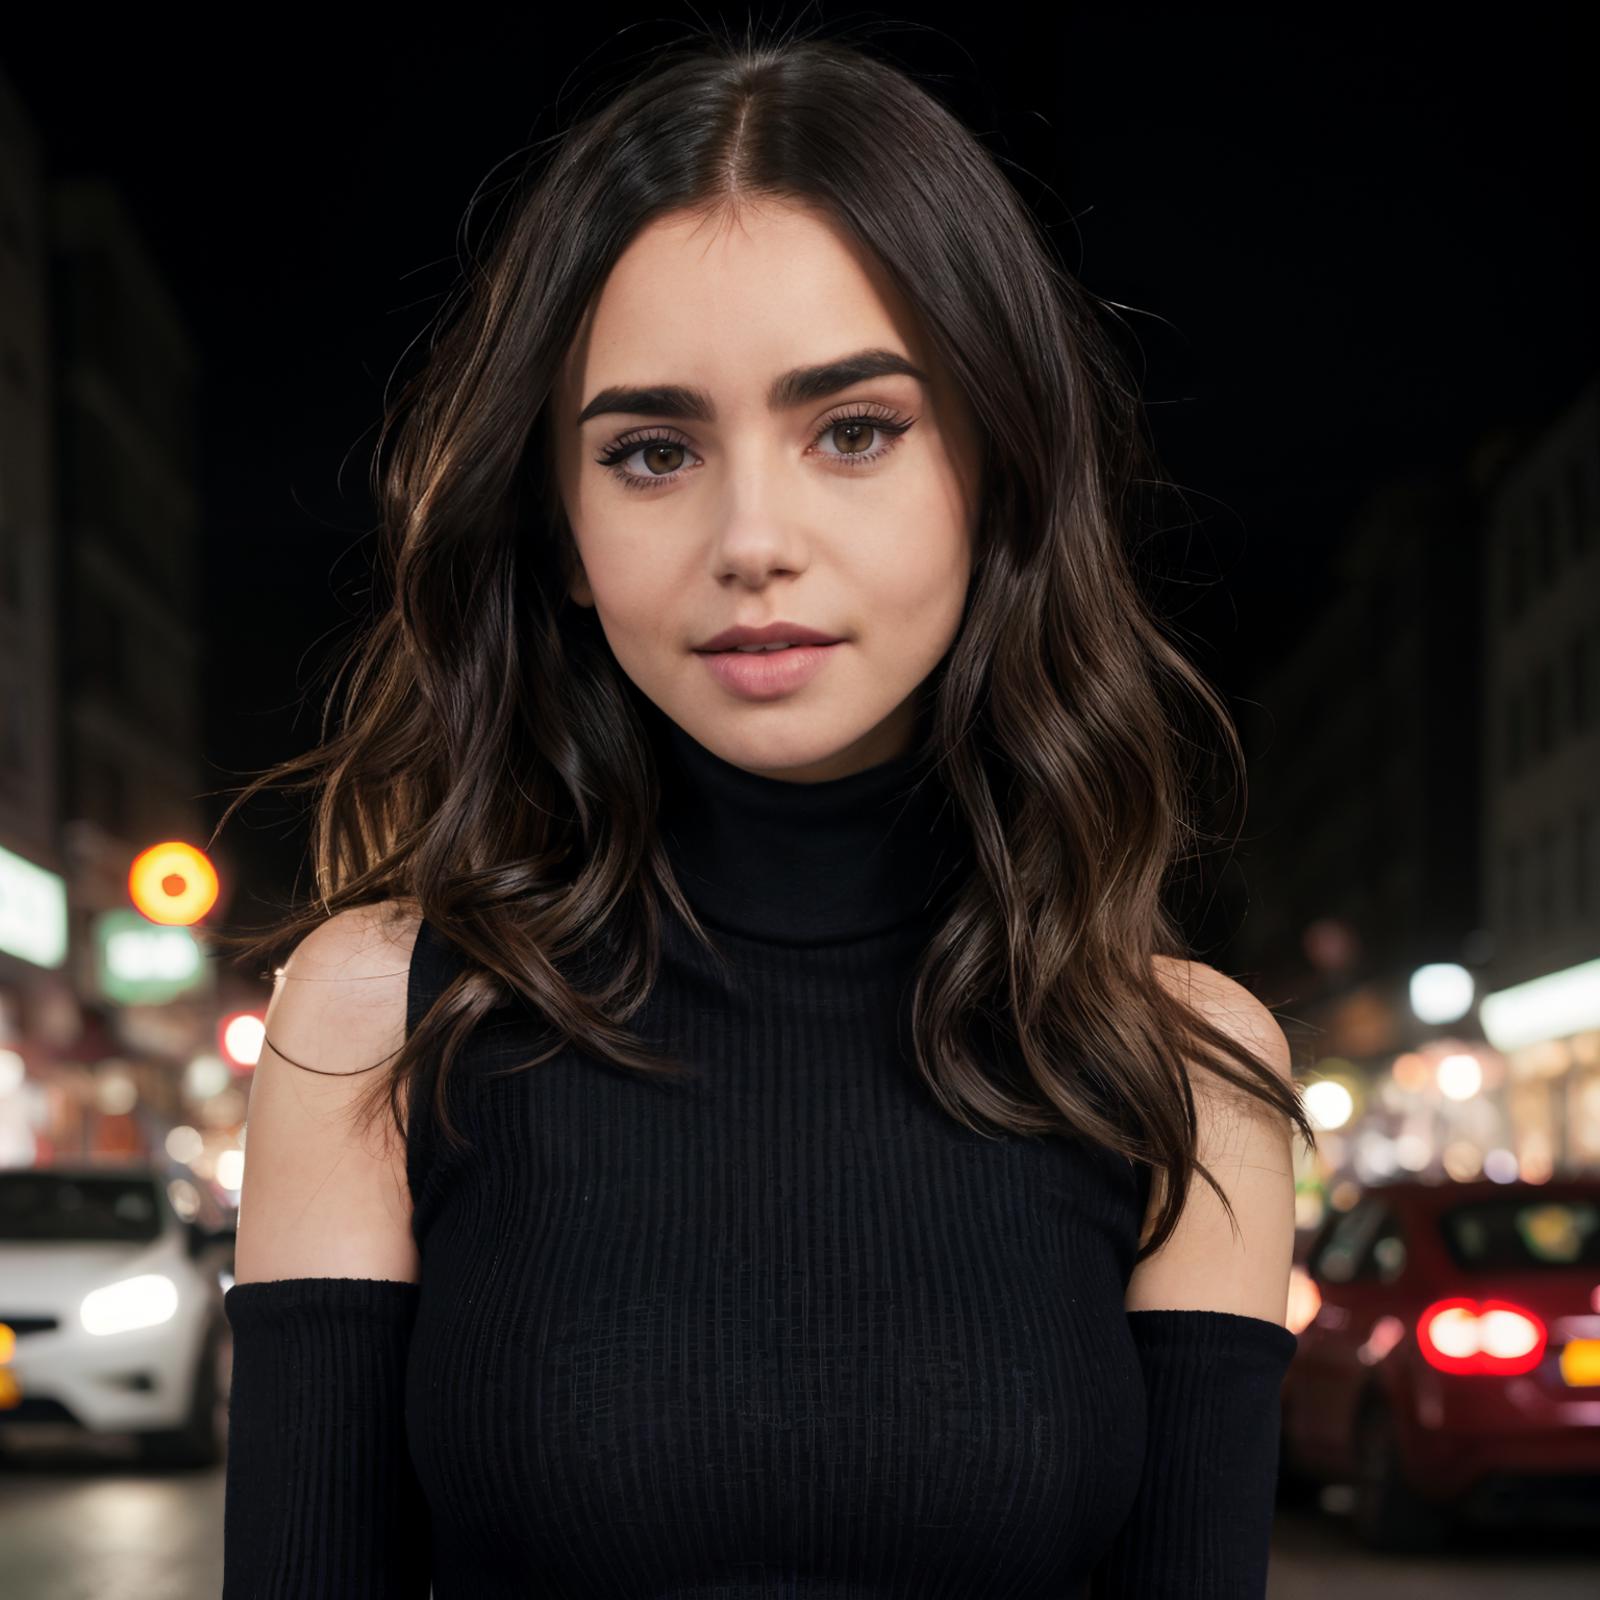 Lily Collins image by damocles_aaa